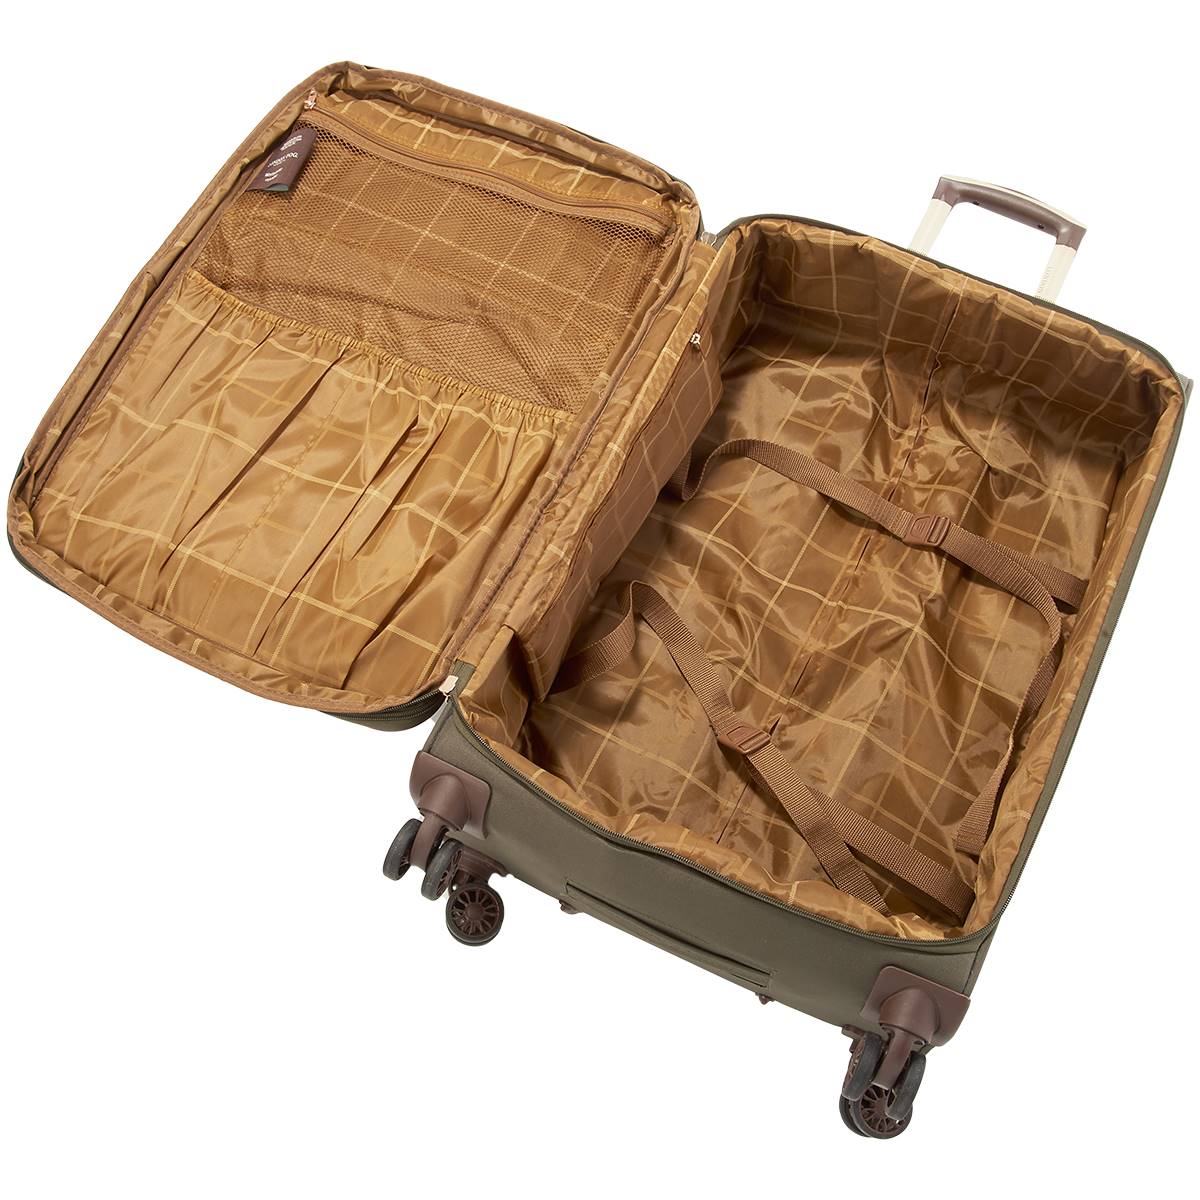 London Fog Westminster 20in. Carry-On Spinner Luggage